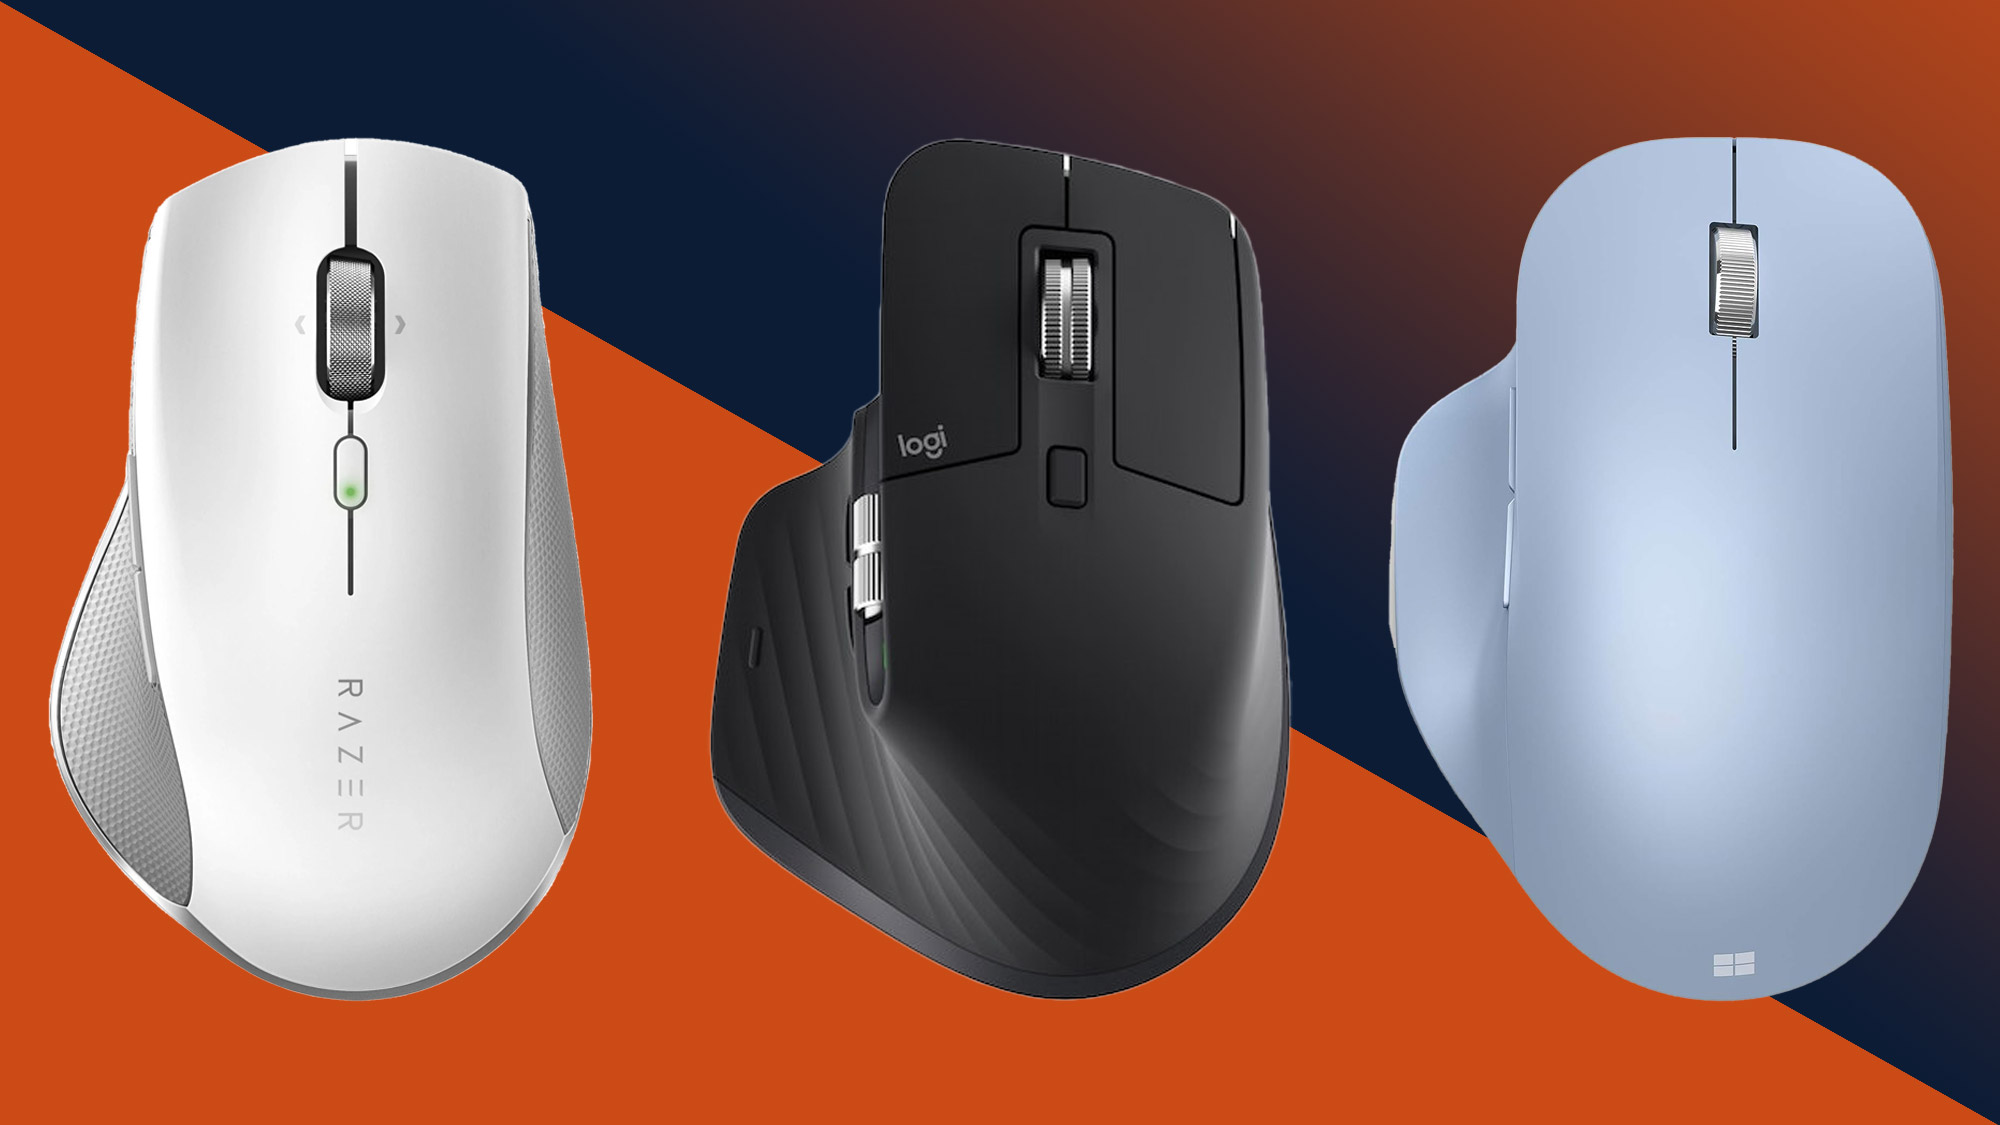 Best mouse feature image with Razer, Microsoft and Logitech mice